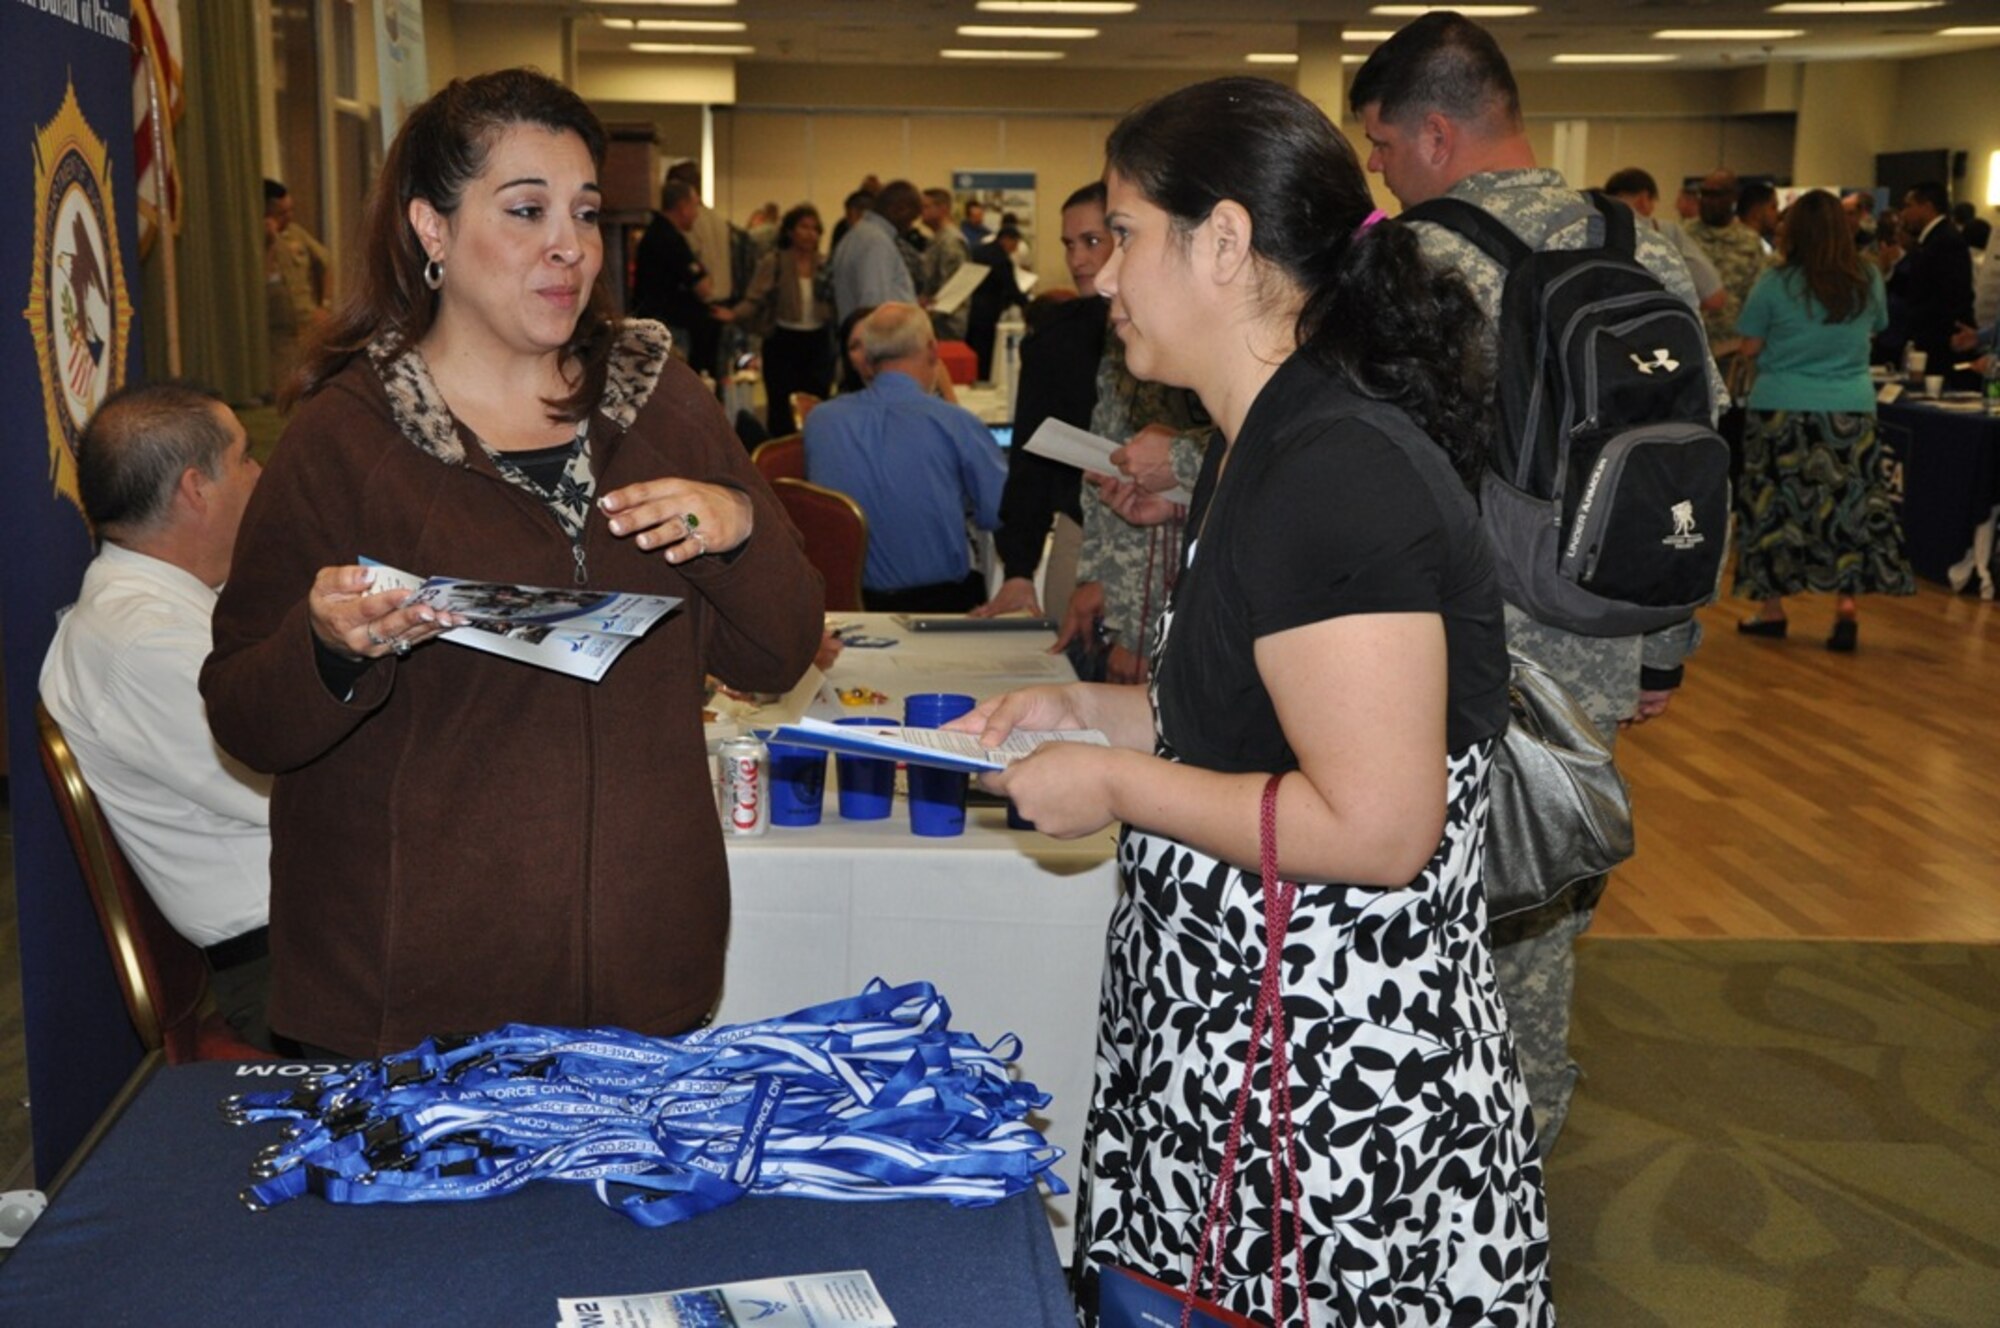 Amy Ruiz, Air Force Personnel Center human resources specialist, provides information about Air Force civilian careers to an attendee during the Hiring Heroes Career Fair at Joint Base San Antonio-Fort Sam Houston March 6. The fair offers job opportunities for veterans and their family members and face-to-face meetings with recruiters from DoD, other federal agencies and the private sector about future employment in civilian career fields. For more information about how to become an Air Force civilian, visit www.afciviliancareers.com. (Courtesy photo) 
